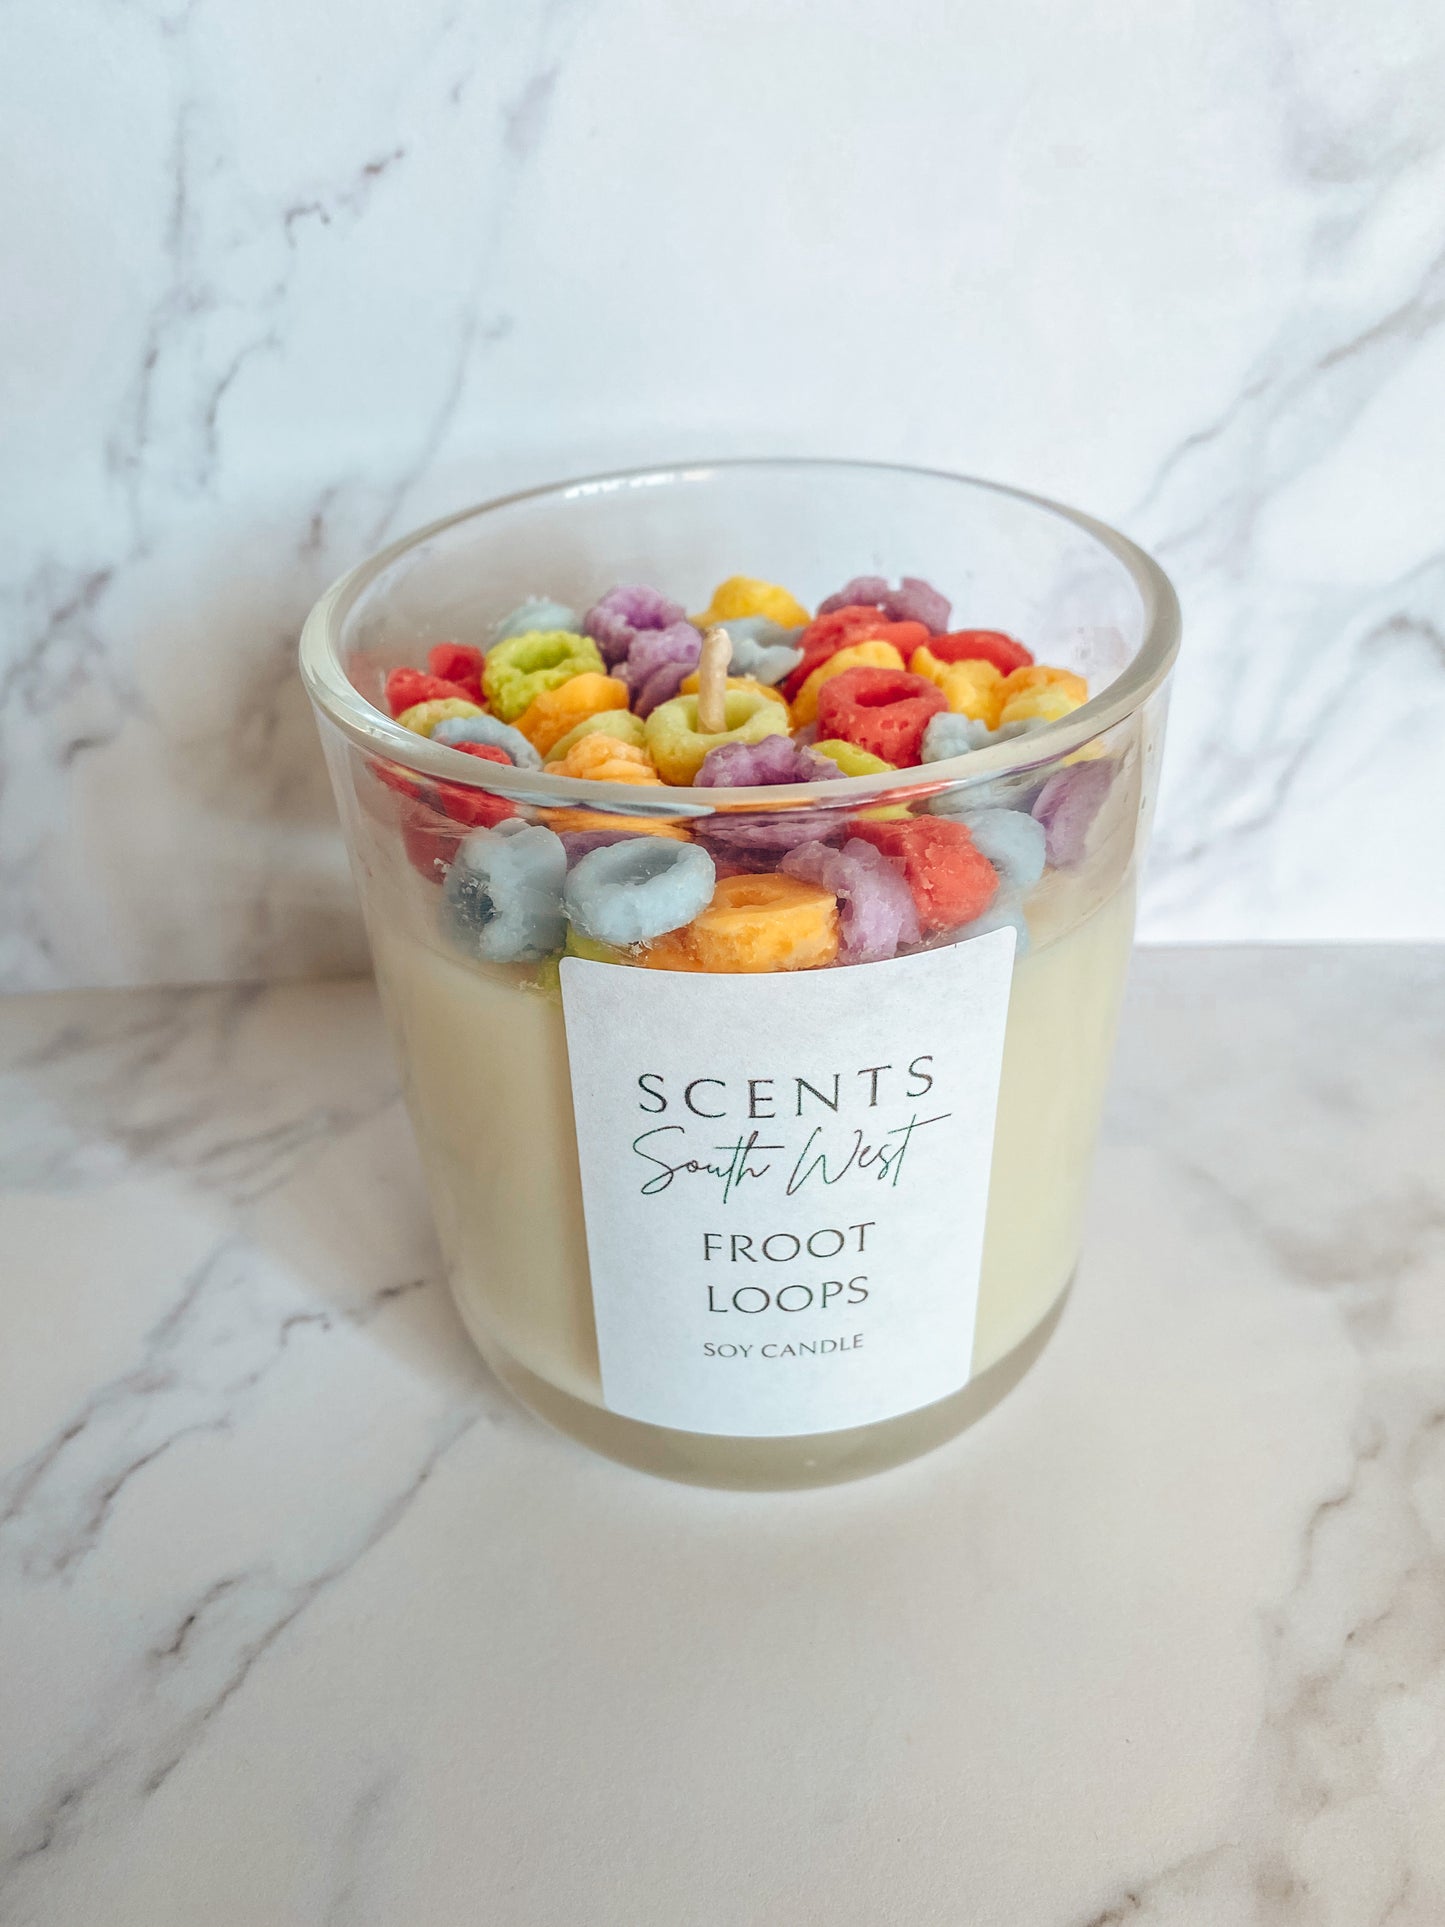 Froot loop type candle